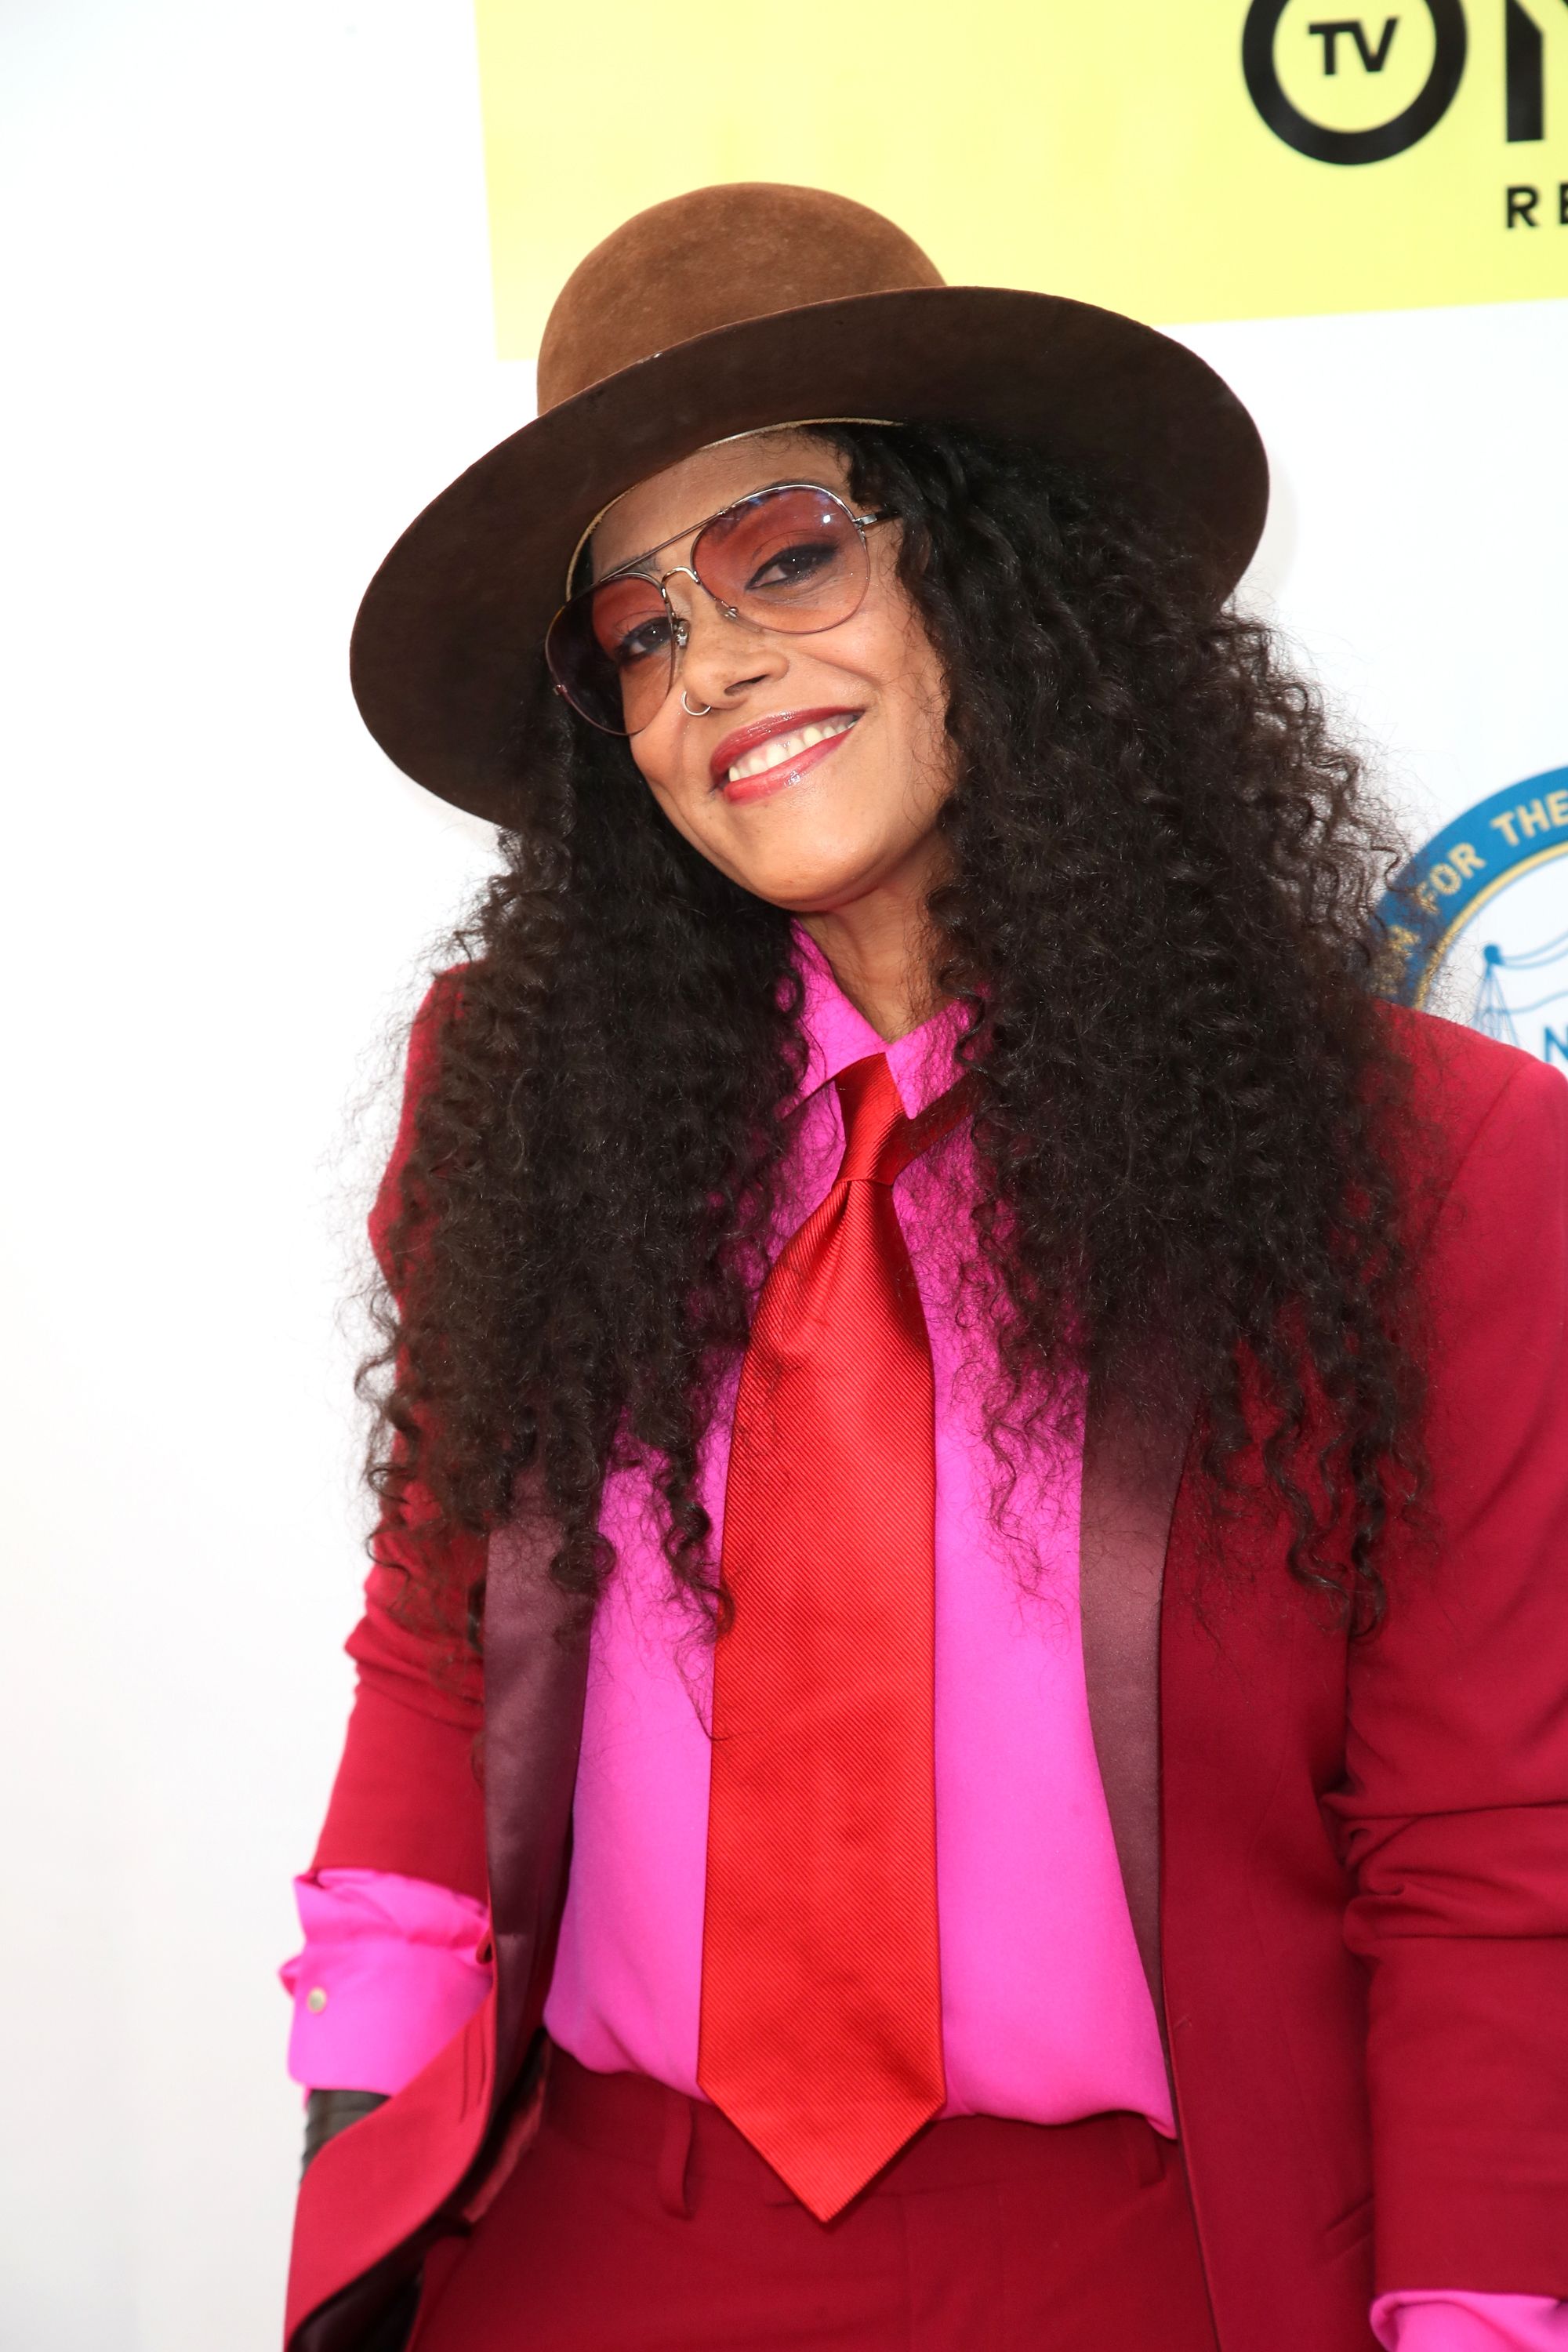 Cree Summer attends a red carpet event | Source: Getty Images/GlobalImagesUkraine